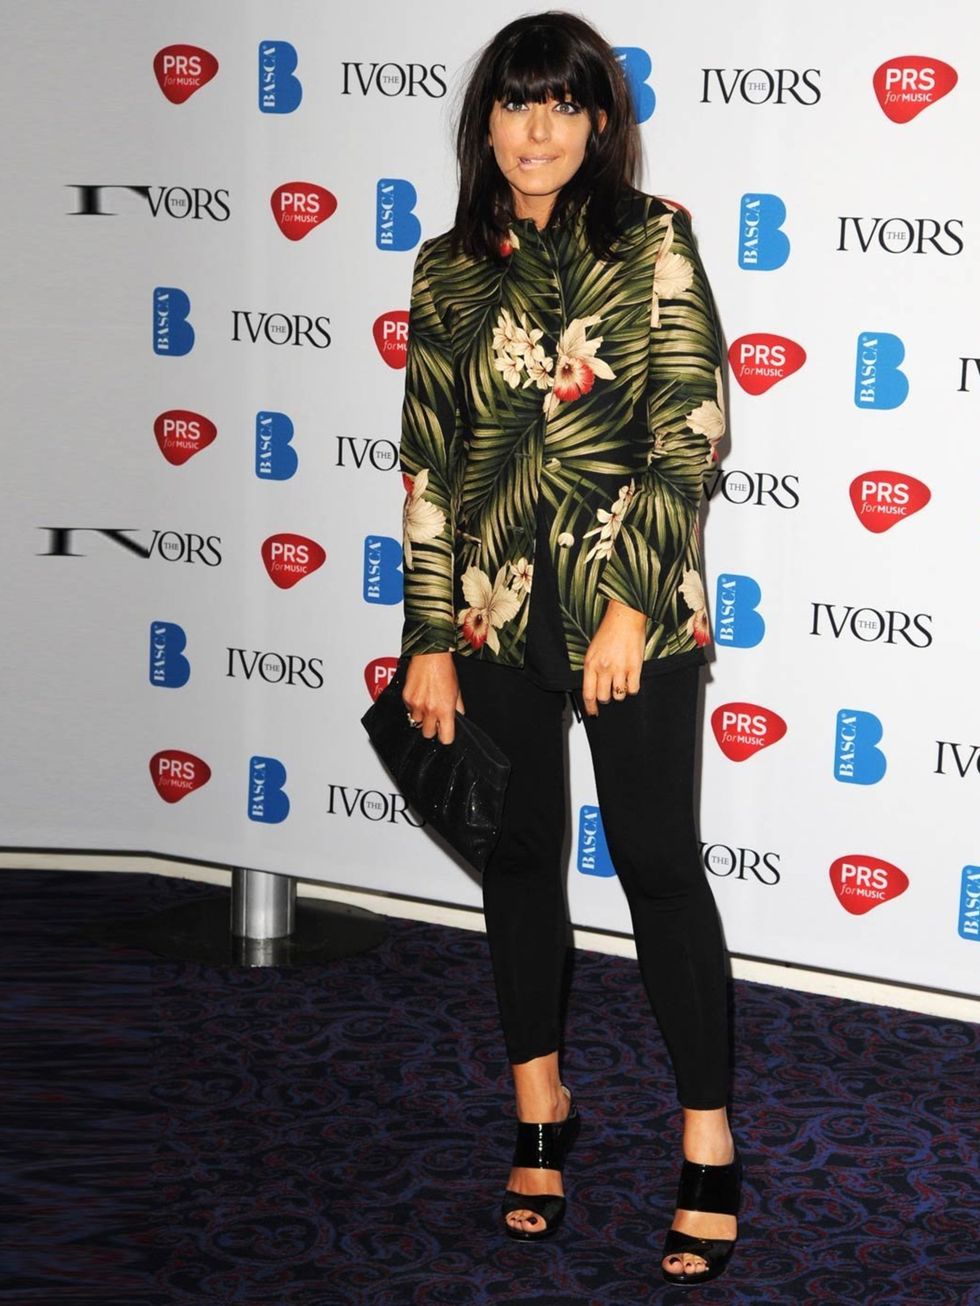 <p>Claudia Winkleman wears bold leaf print jacket and black tights to Ivor Novello Awards</p>